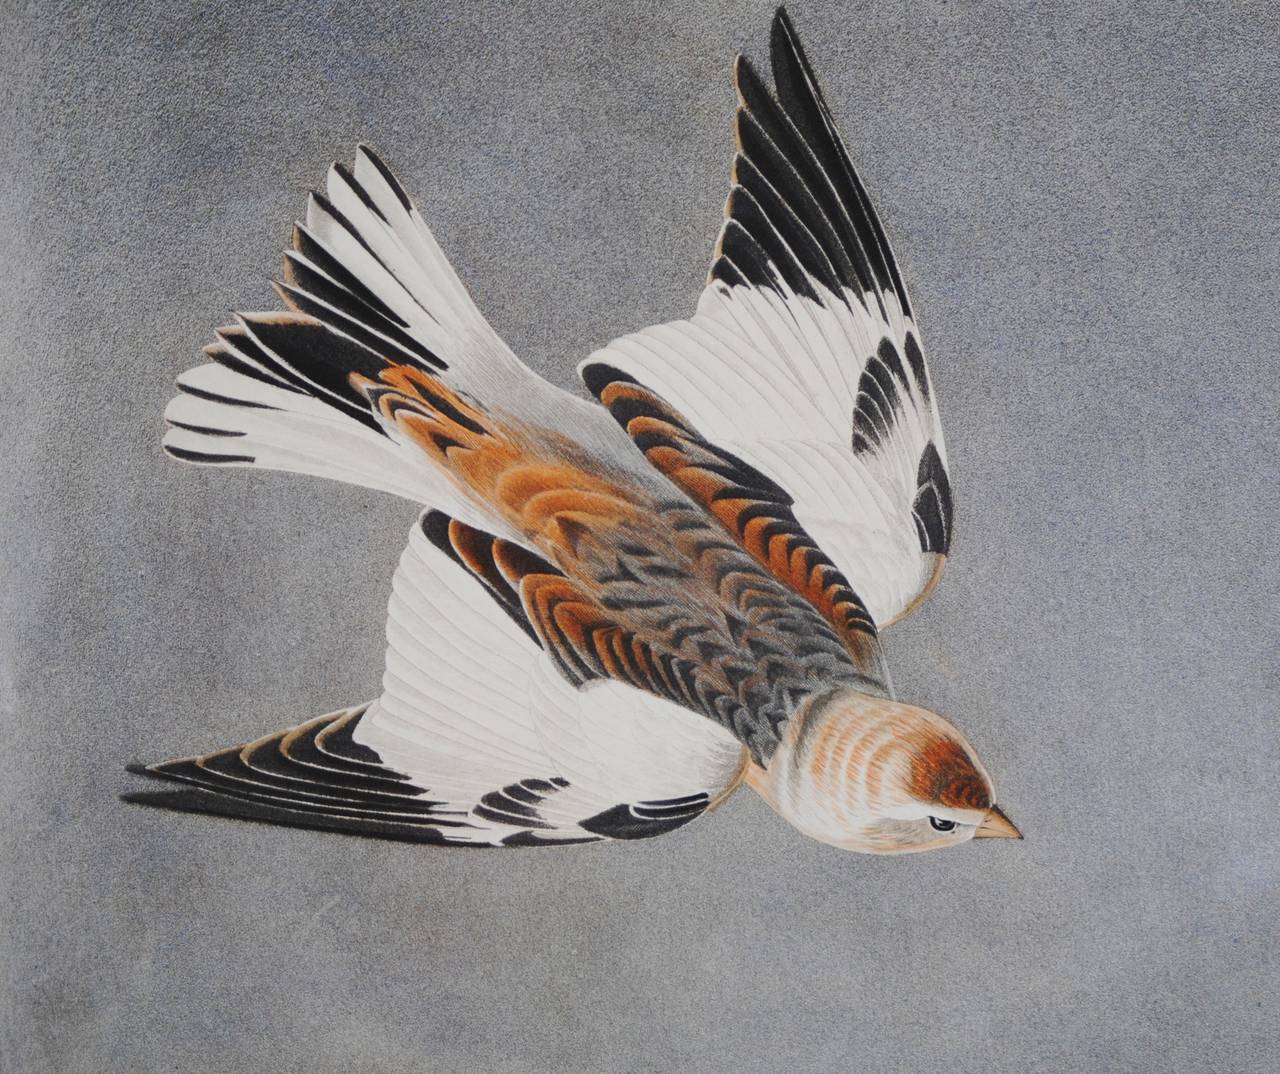 An original hand colored aquatint by American artist John James AUDUBON (1785-1851) titled "Snow Bunting" from Audubon's famous "Birds of America" (1826-1838. "Snow Bunting" engraved by Robert Havell in 1834 on double